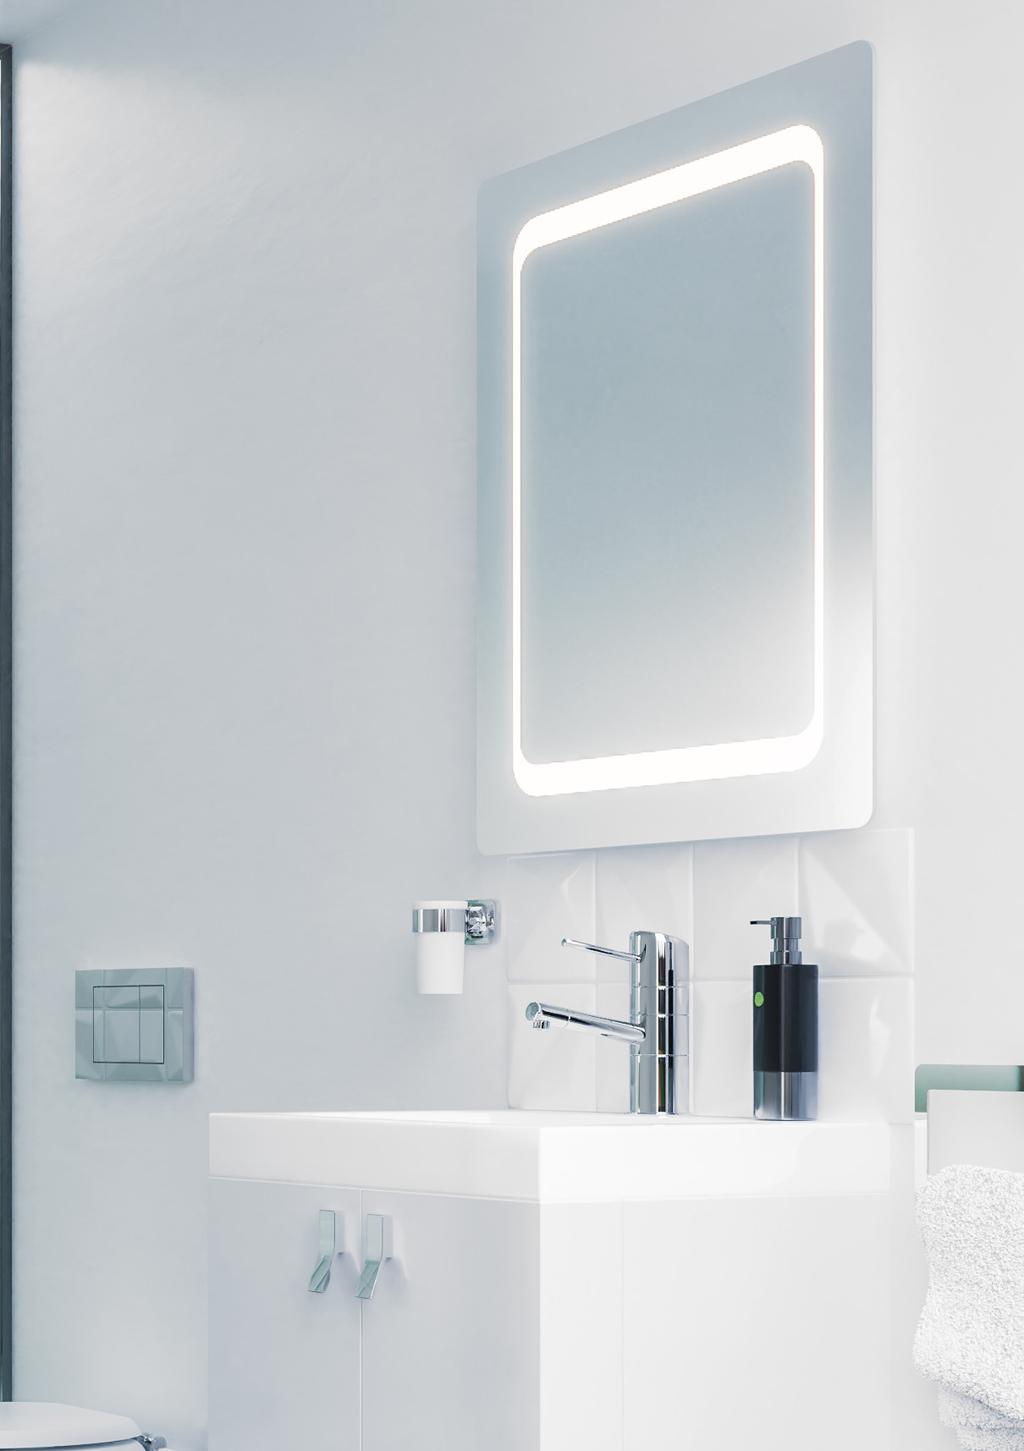 MIRRORS Transform any bathroom environment with the inclusion of a